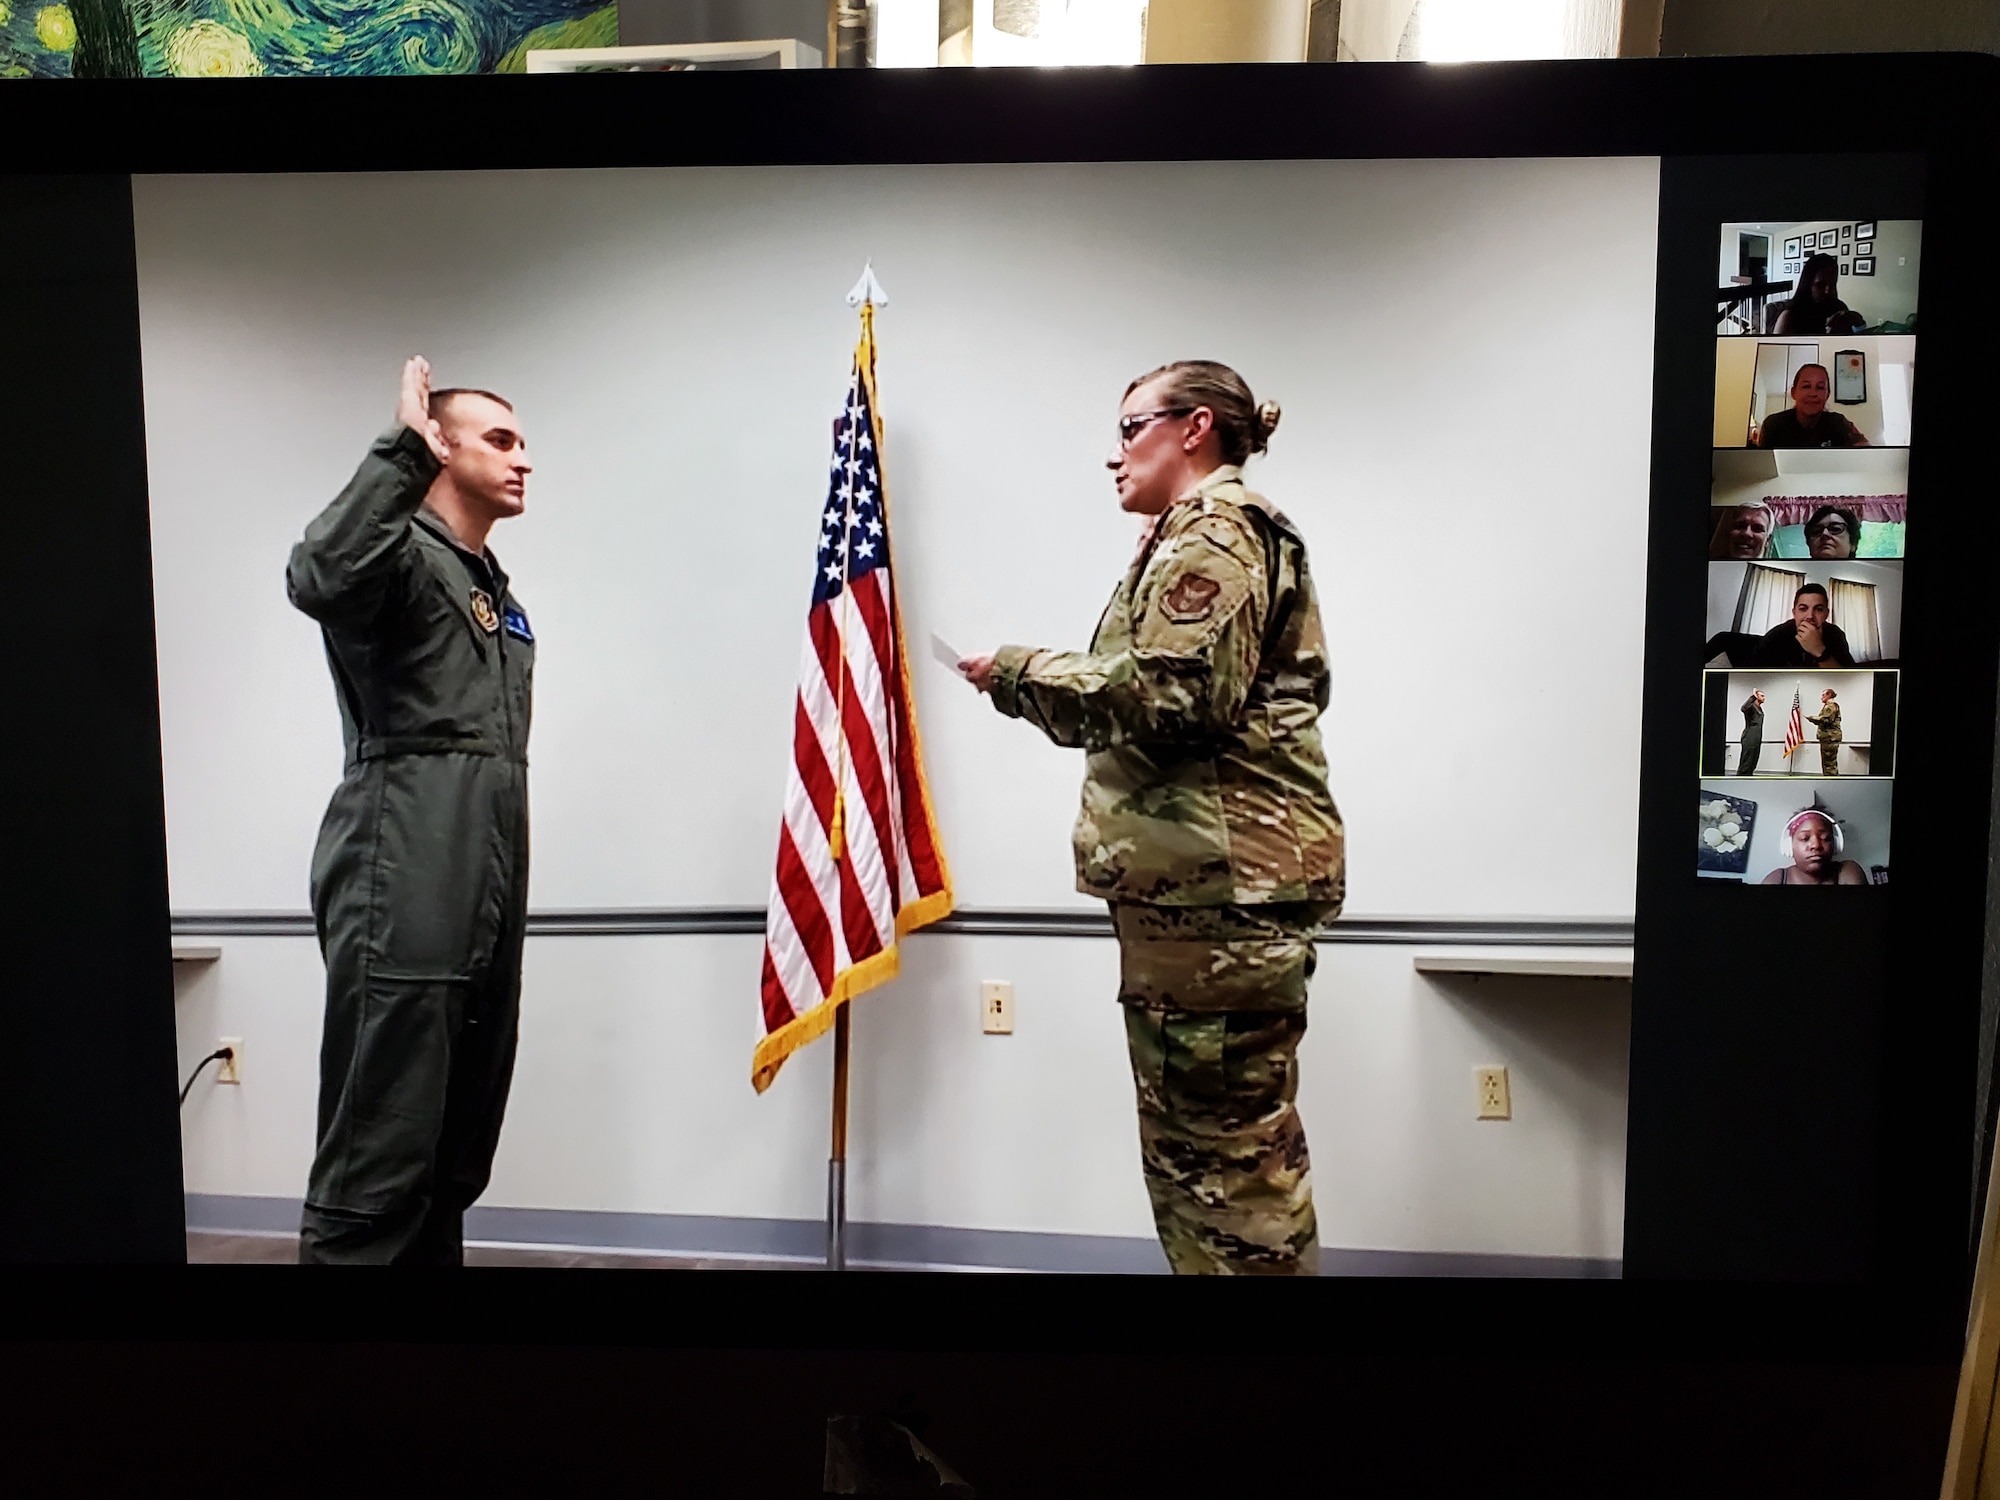 Capt. Tyler Relph, 932nd Medical Squadron critical care nurse, is sworn-in to active duty by Maj. Emily Derry, 932nd MDS Critical Care Flight commander, June 13, 2020 Scott Air Force Base, Illinois, as family and friends watch Relph's virtual ceremony via Zoom. (U.S. Air Force photo by Master Sgt. Christopher Parr)